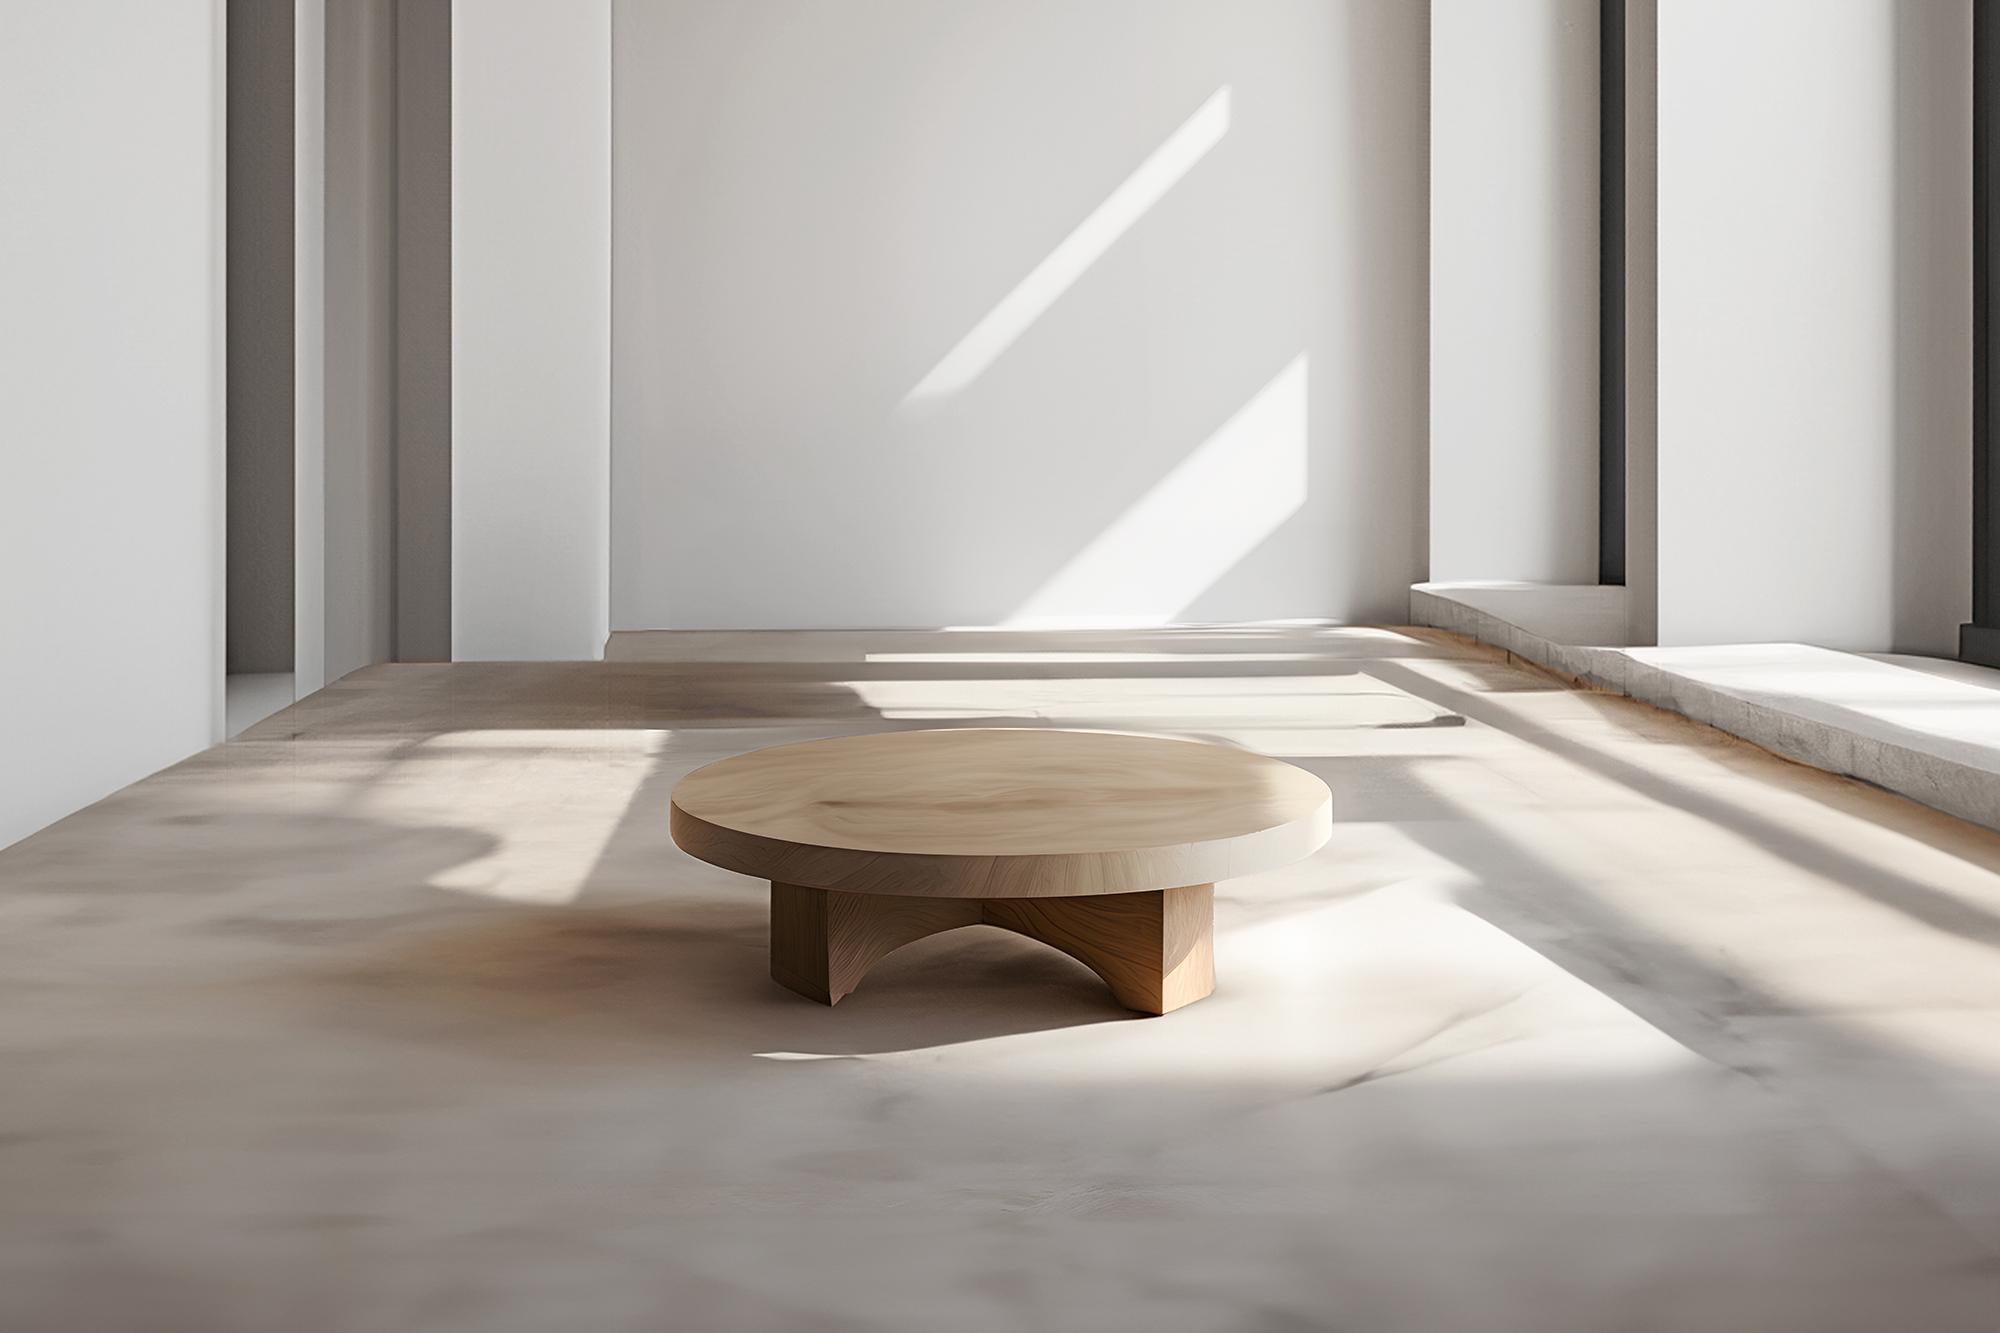 Minimalist Natural Oak Coffee Table - Zen Fundamenta 38 by NONO

Sculptural coffee table made of solid wood with a natural water-based or black tinted finish. Due to the nature of the production process, each piece may vary in grain, texture, shape